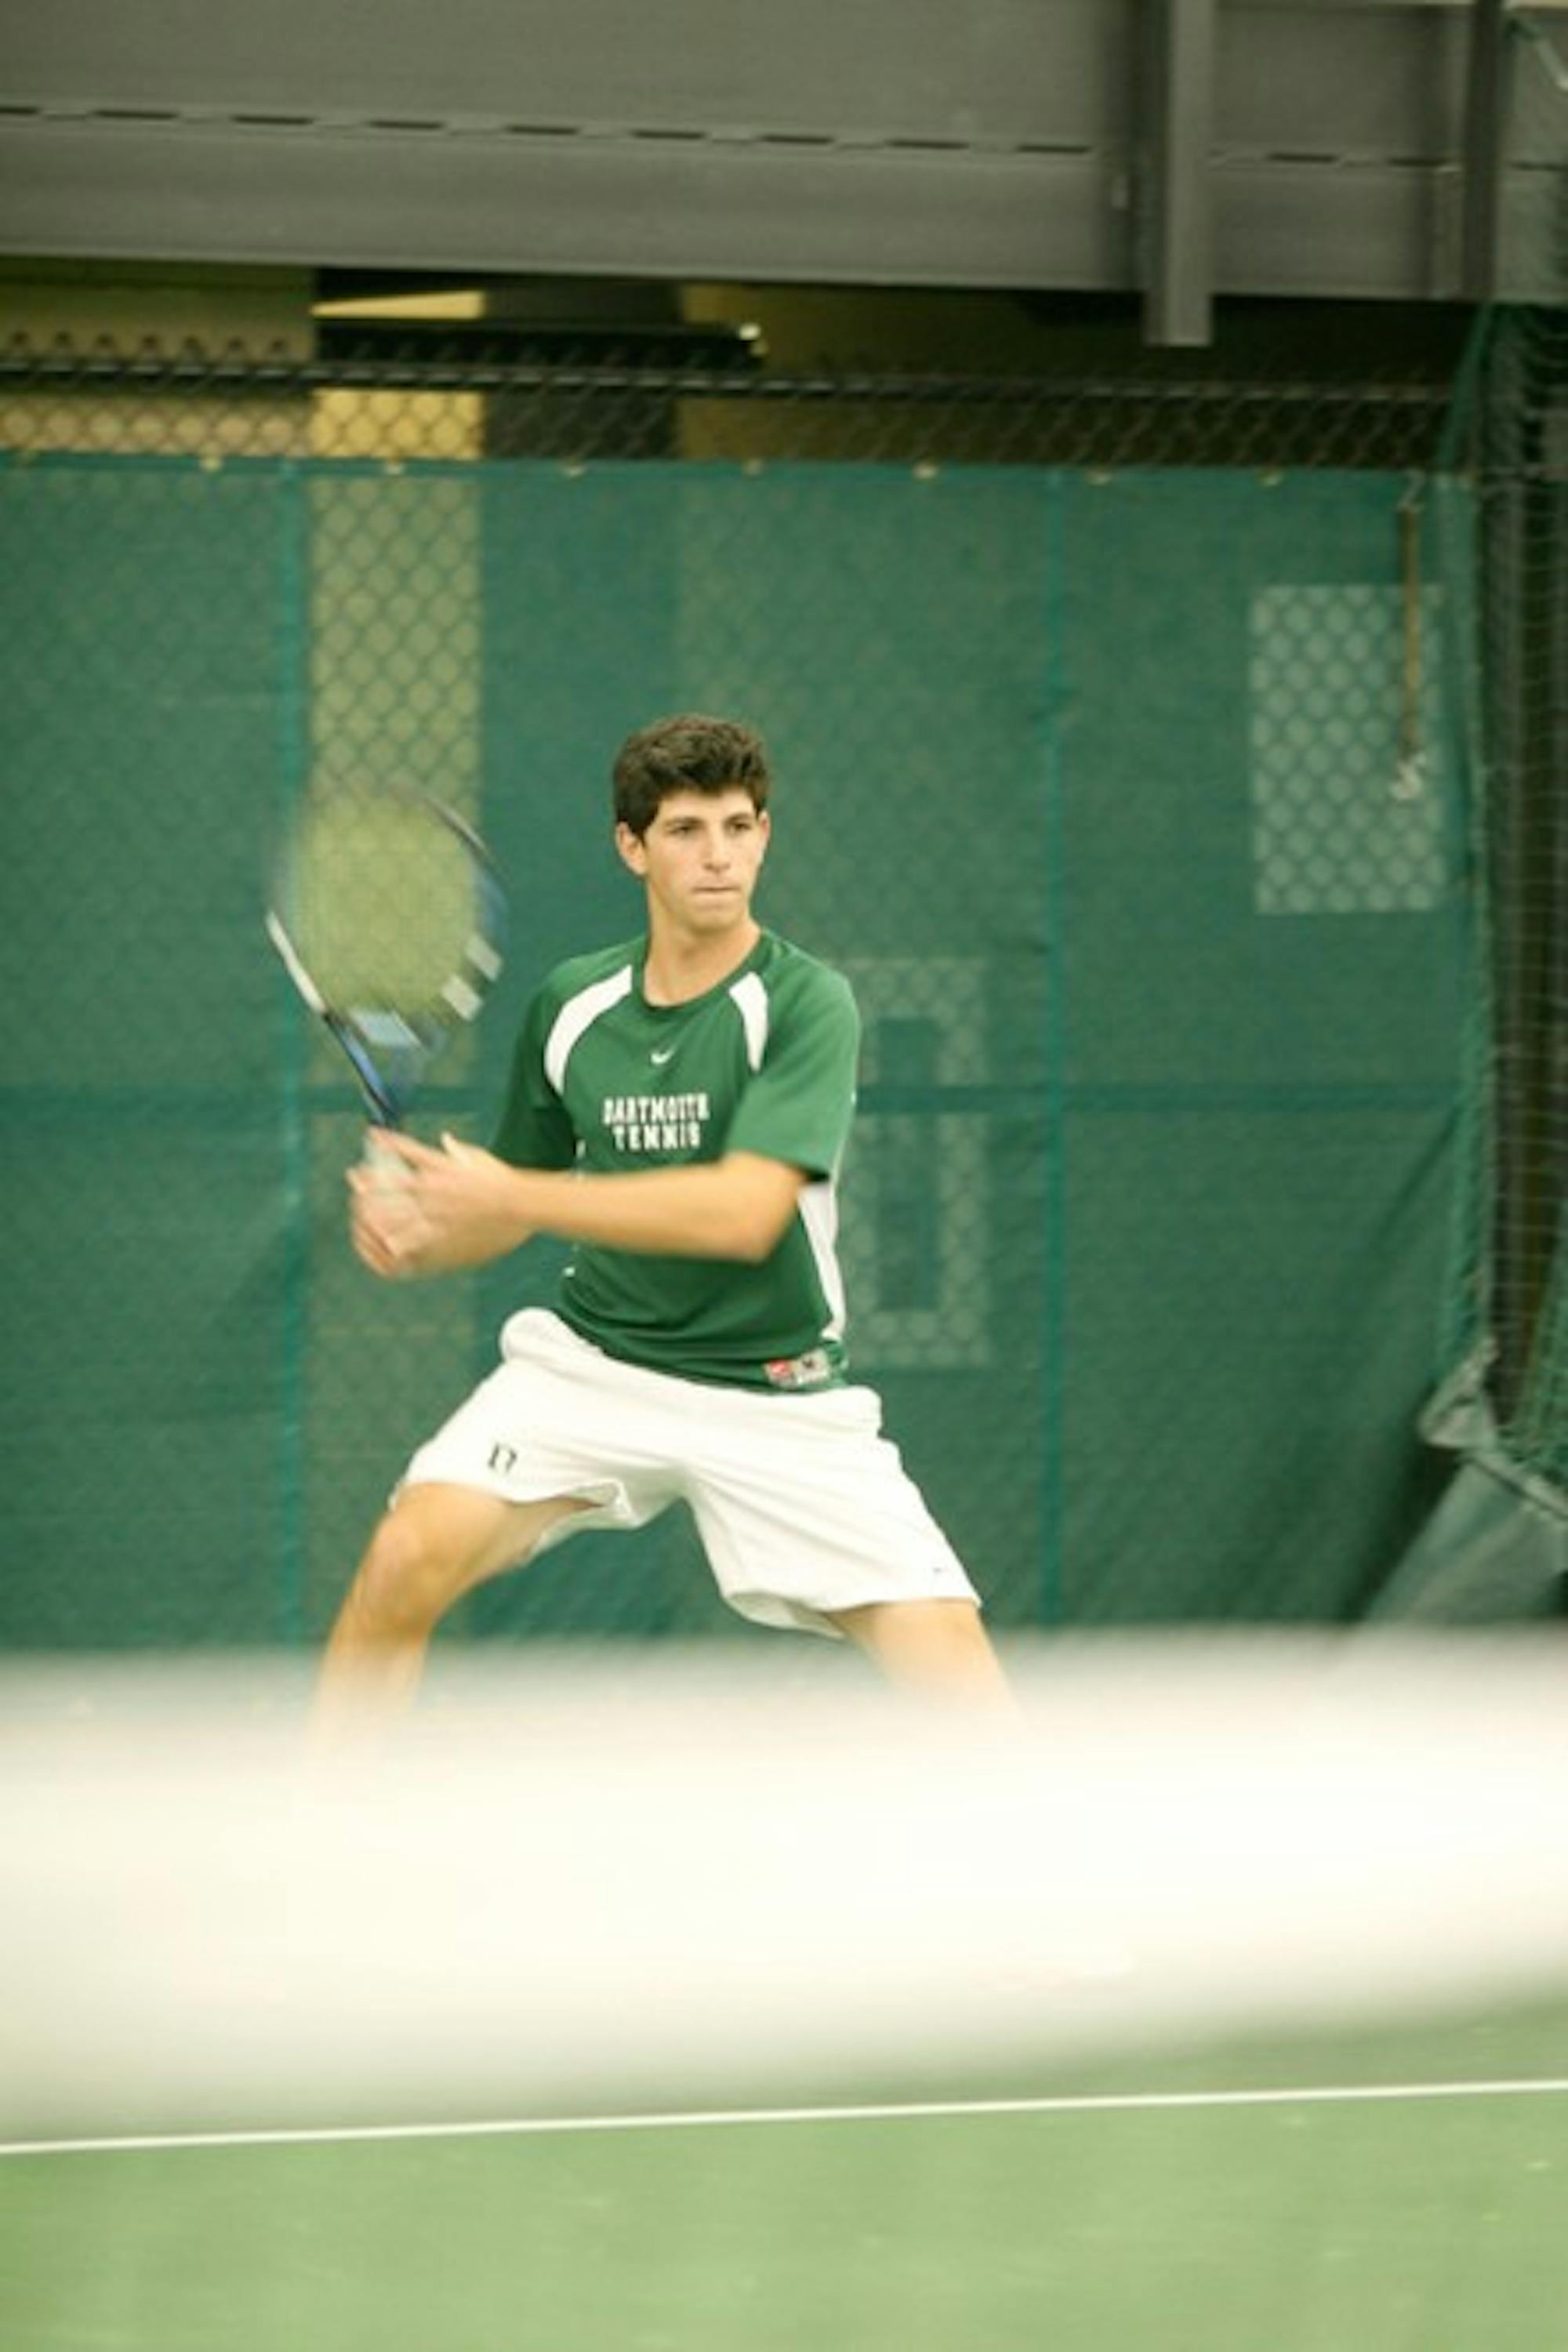 David Fink '11 played well in doubles and singles, winning the flight B doubles with Eric Scholobohm '11 and reaching the quarterfinals in flight B singles.